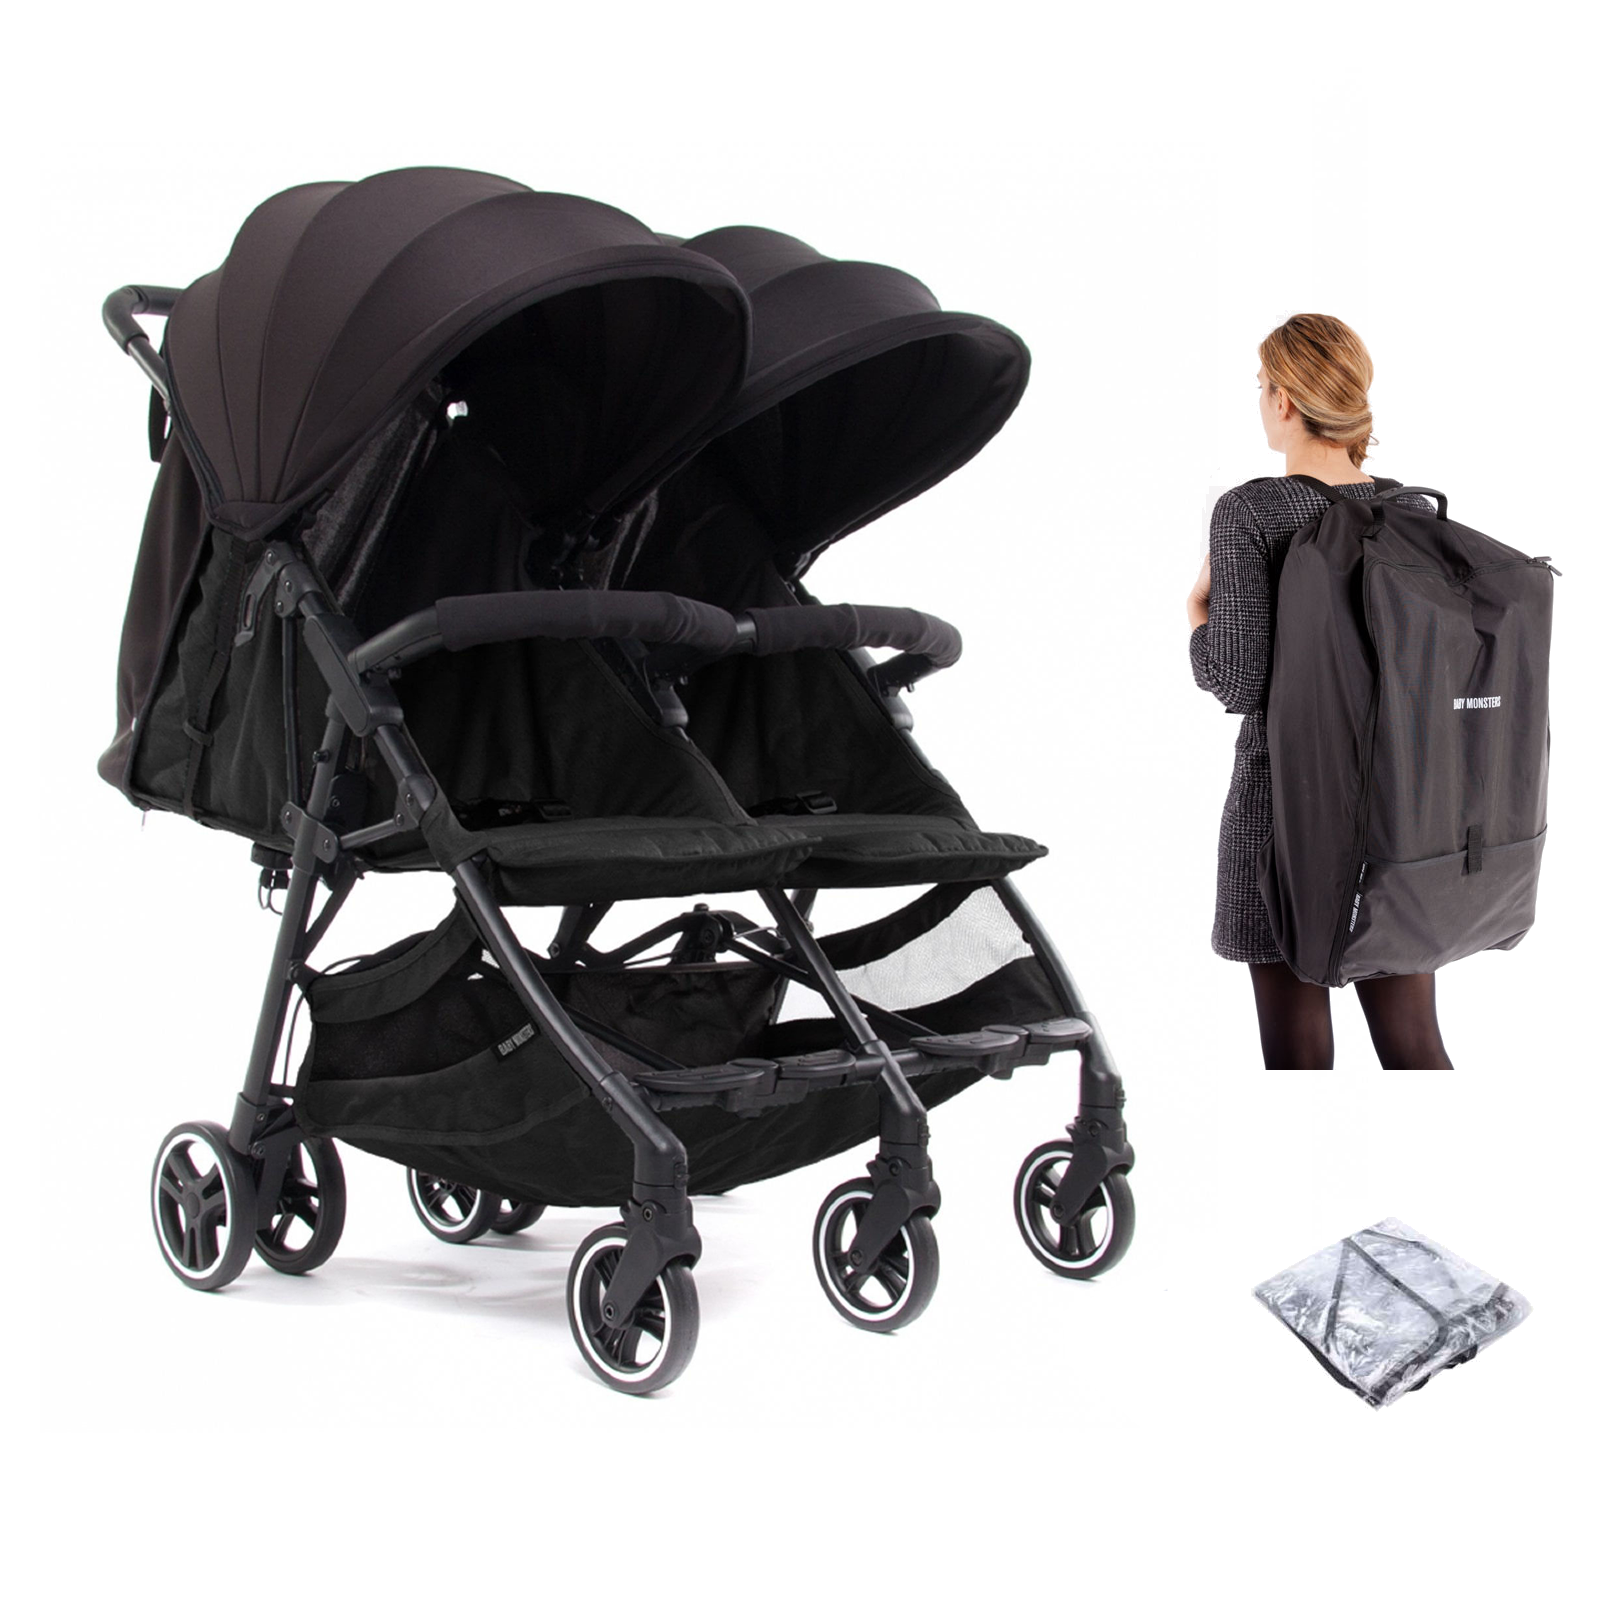 Baby Monsters Kuki Lightweight (9.8kg) Twin Double Pushchair & Raincover with Transport Bag - Black